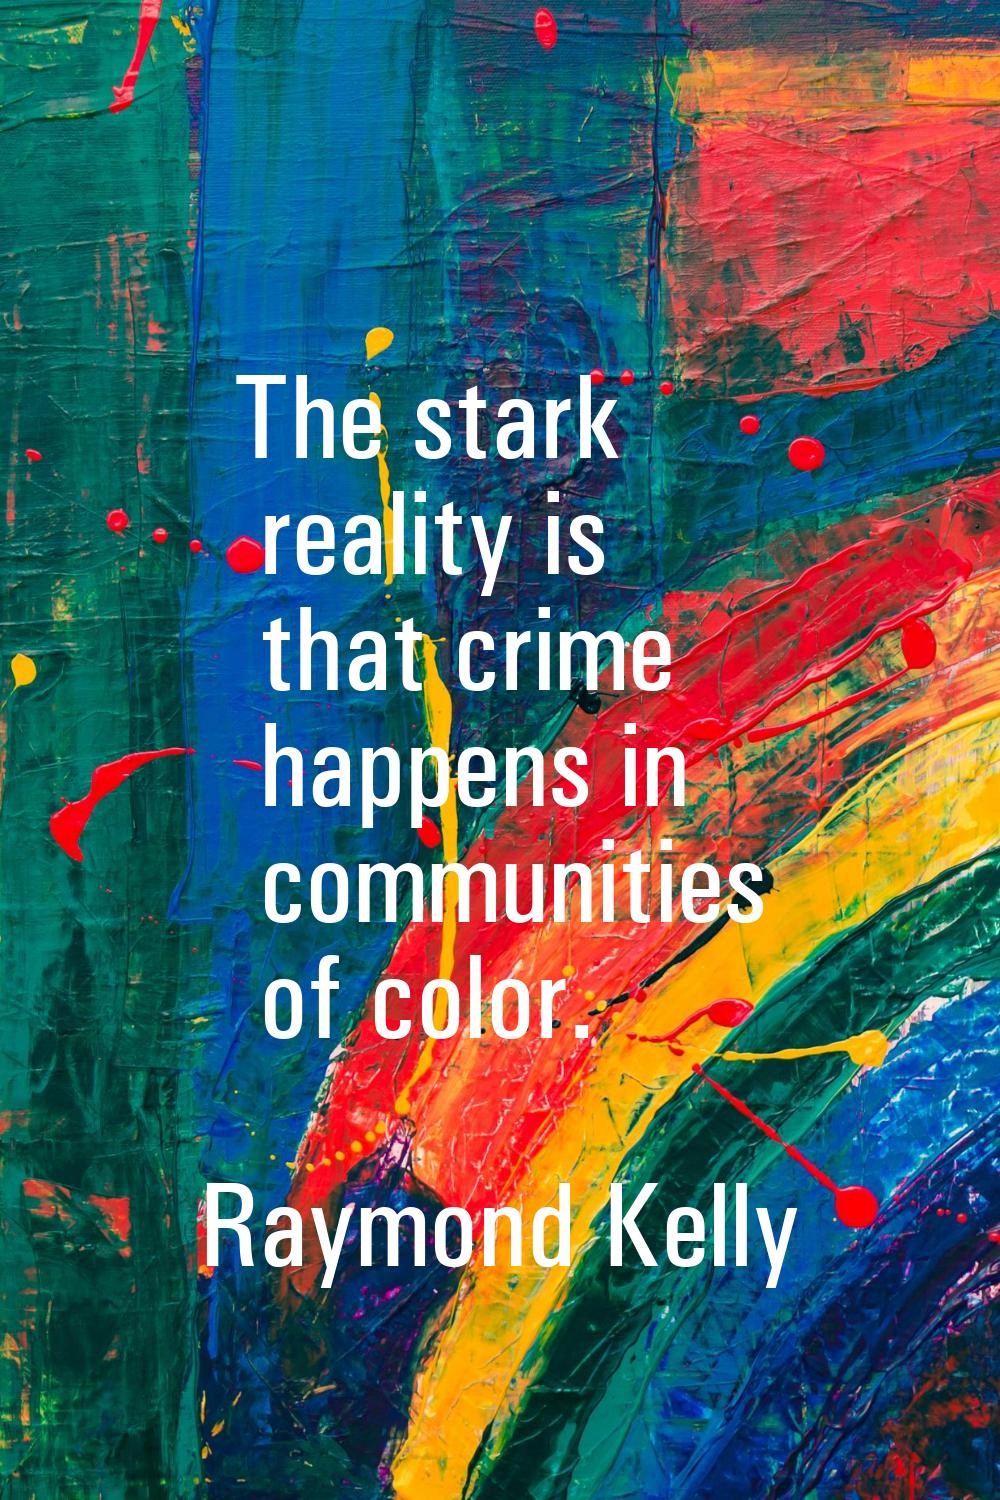 The stark reality is that crime happens in communities of color.